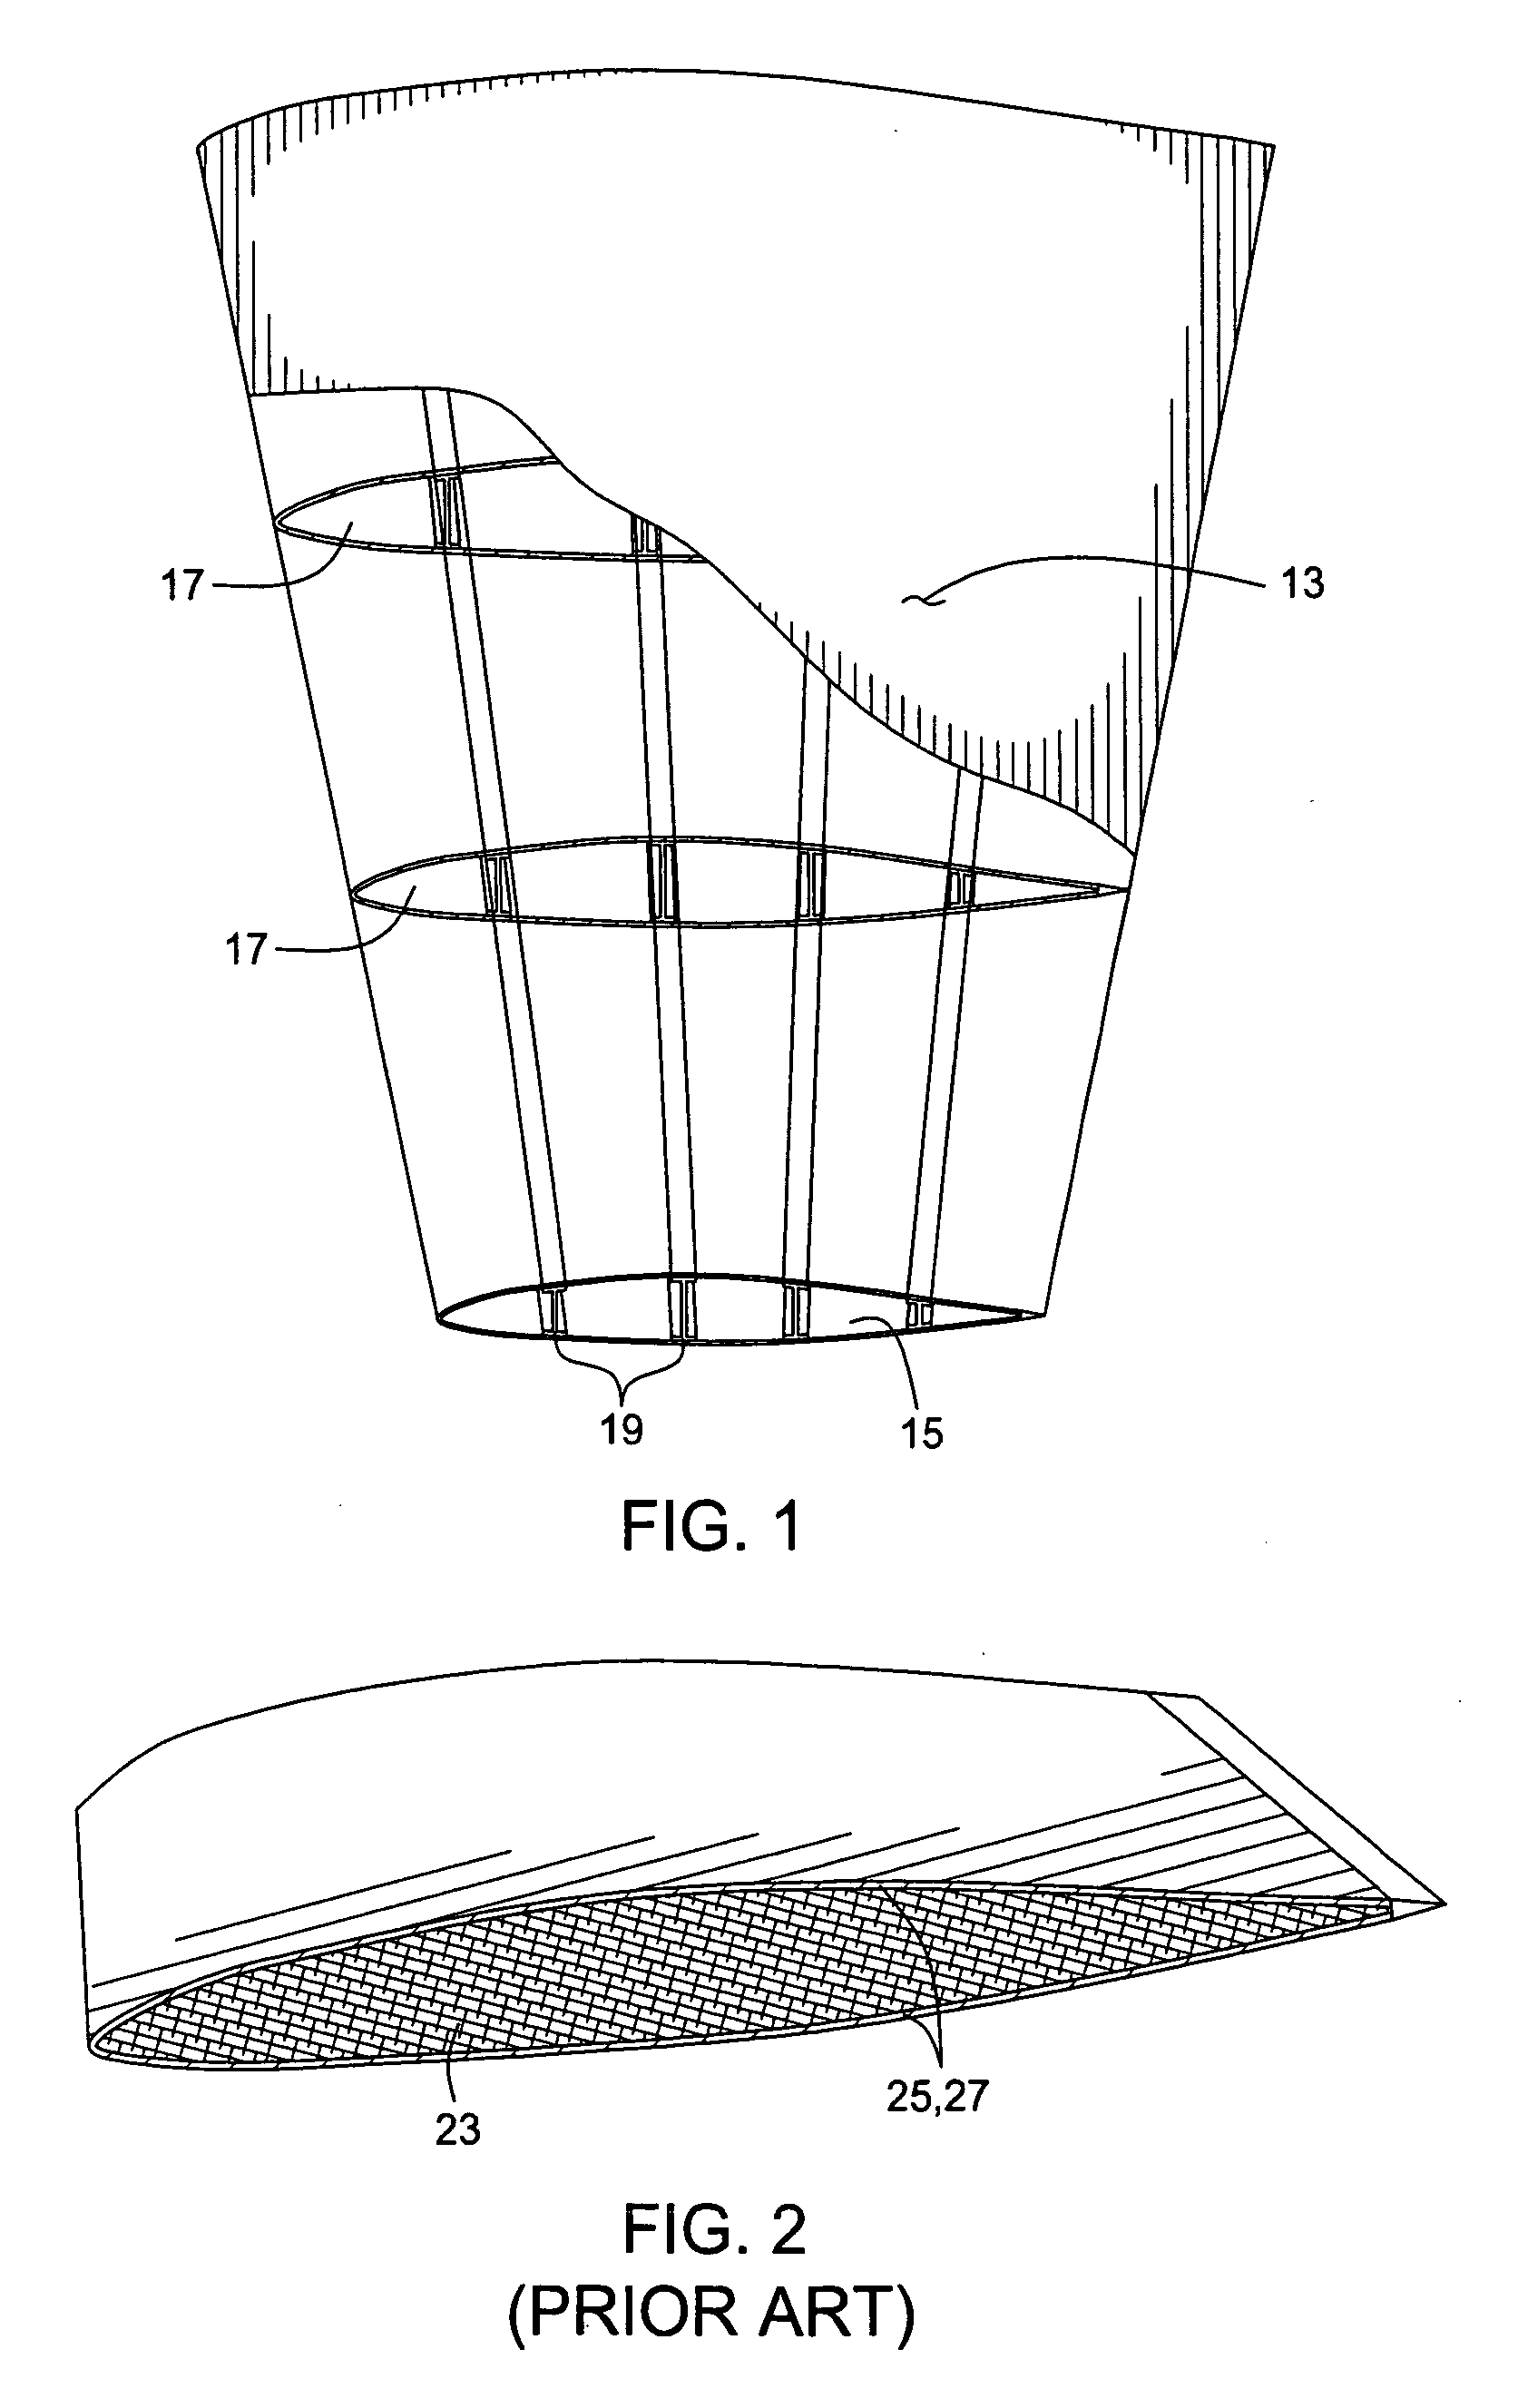 System, method, apparatus, and applications for open cell woven structural supports